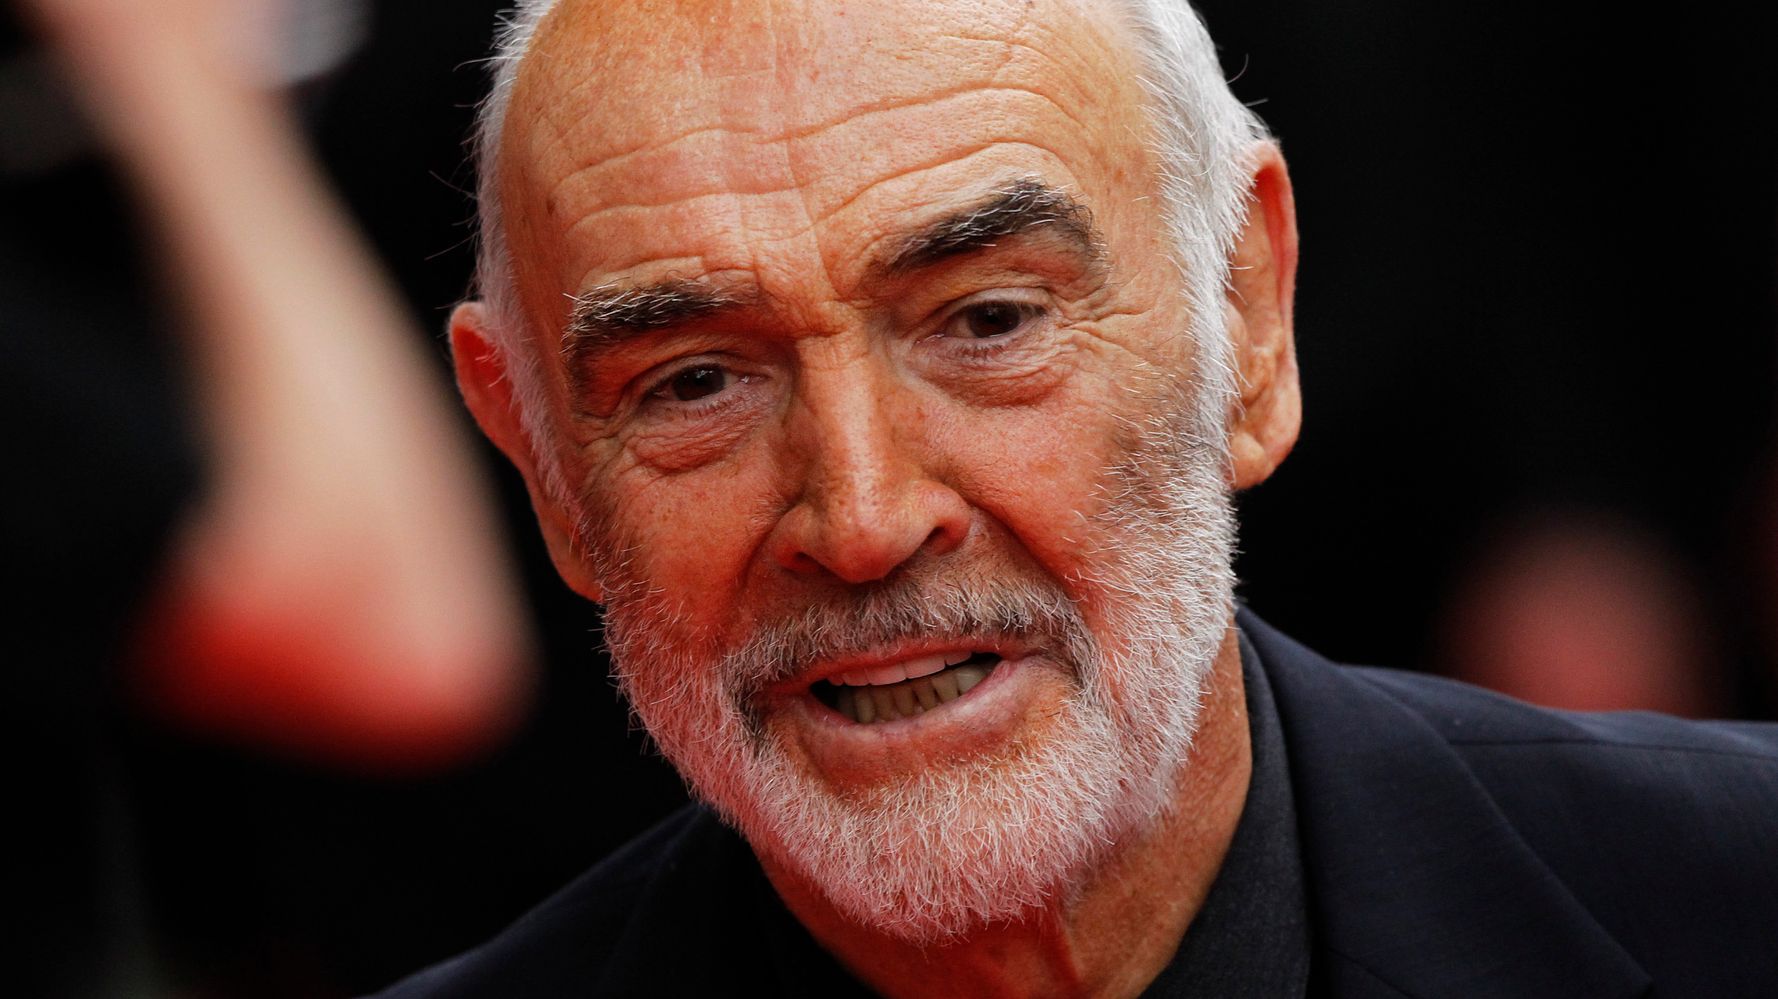 Sean Connery, The First James Bond, Dies At 90